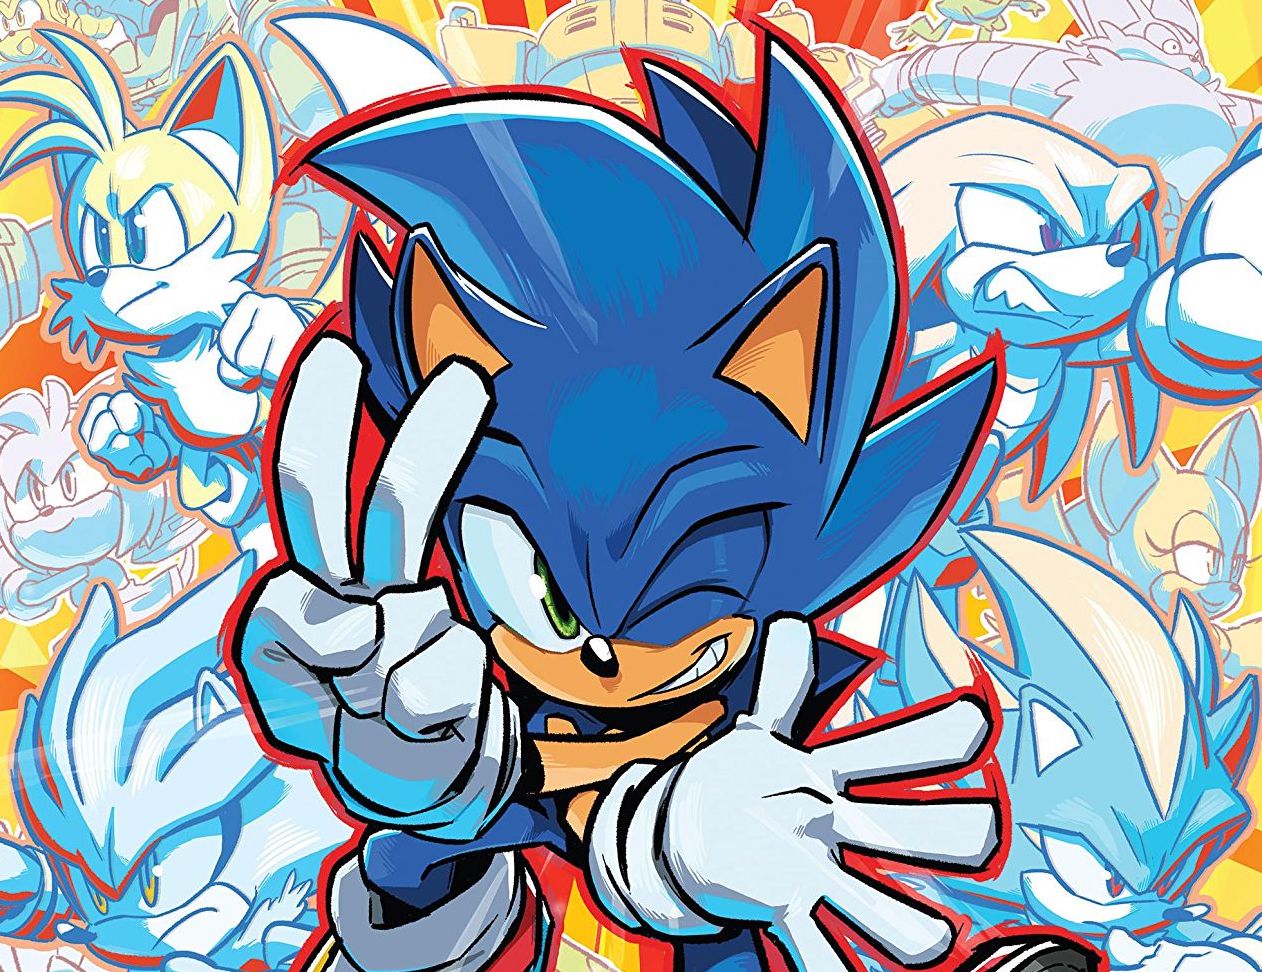 Sonic the Hedgehog #25 Review